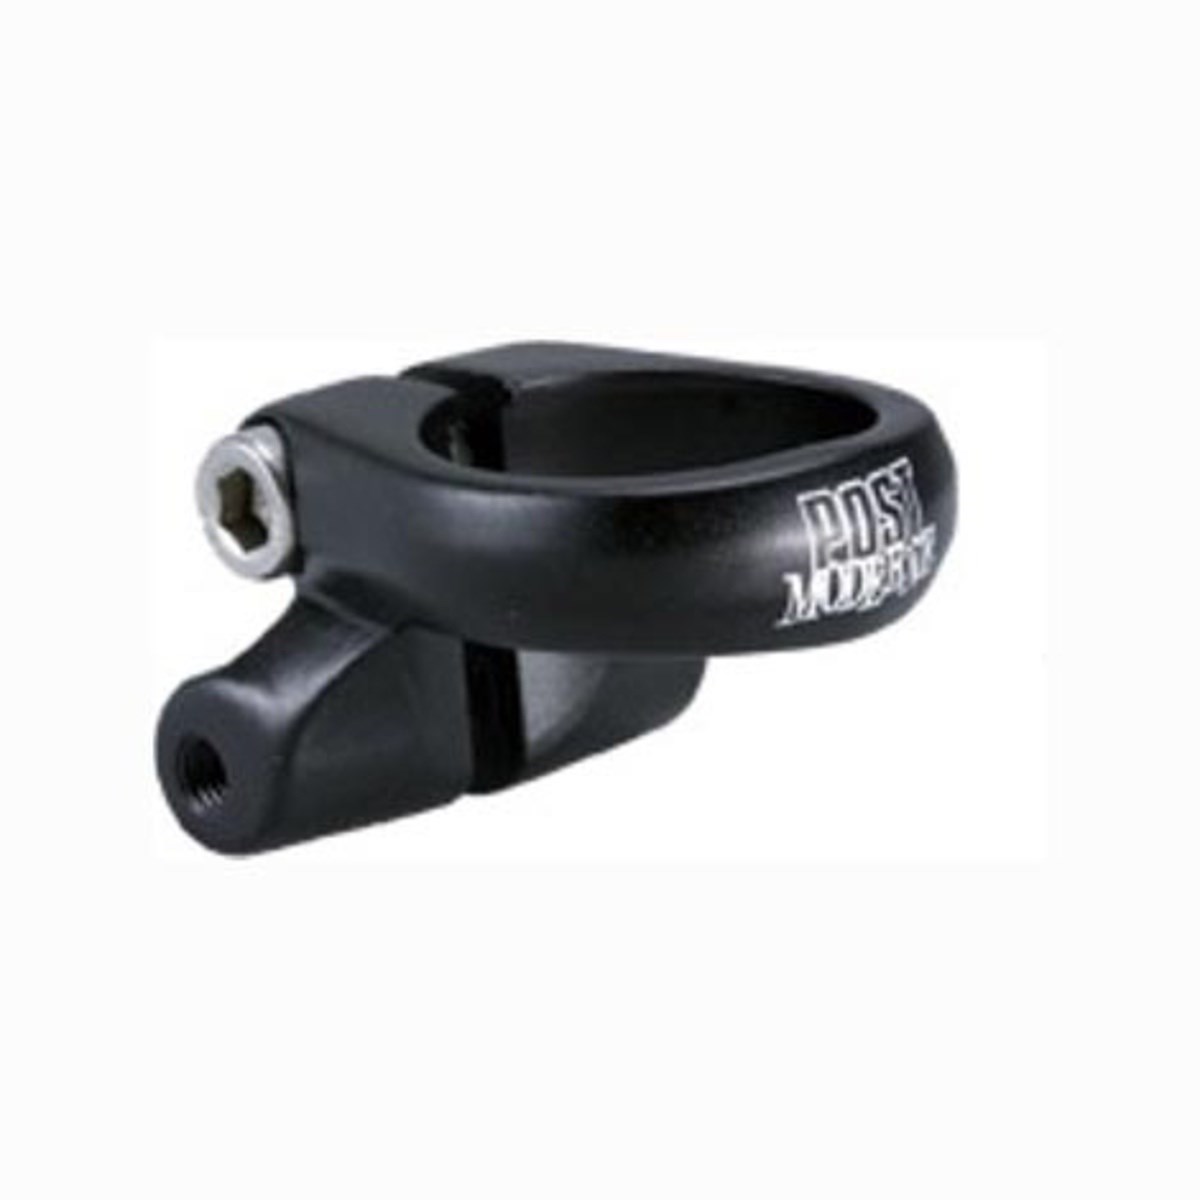 Post Moderne Rack Mount Seatclamp product image